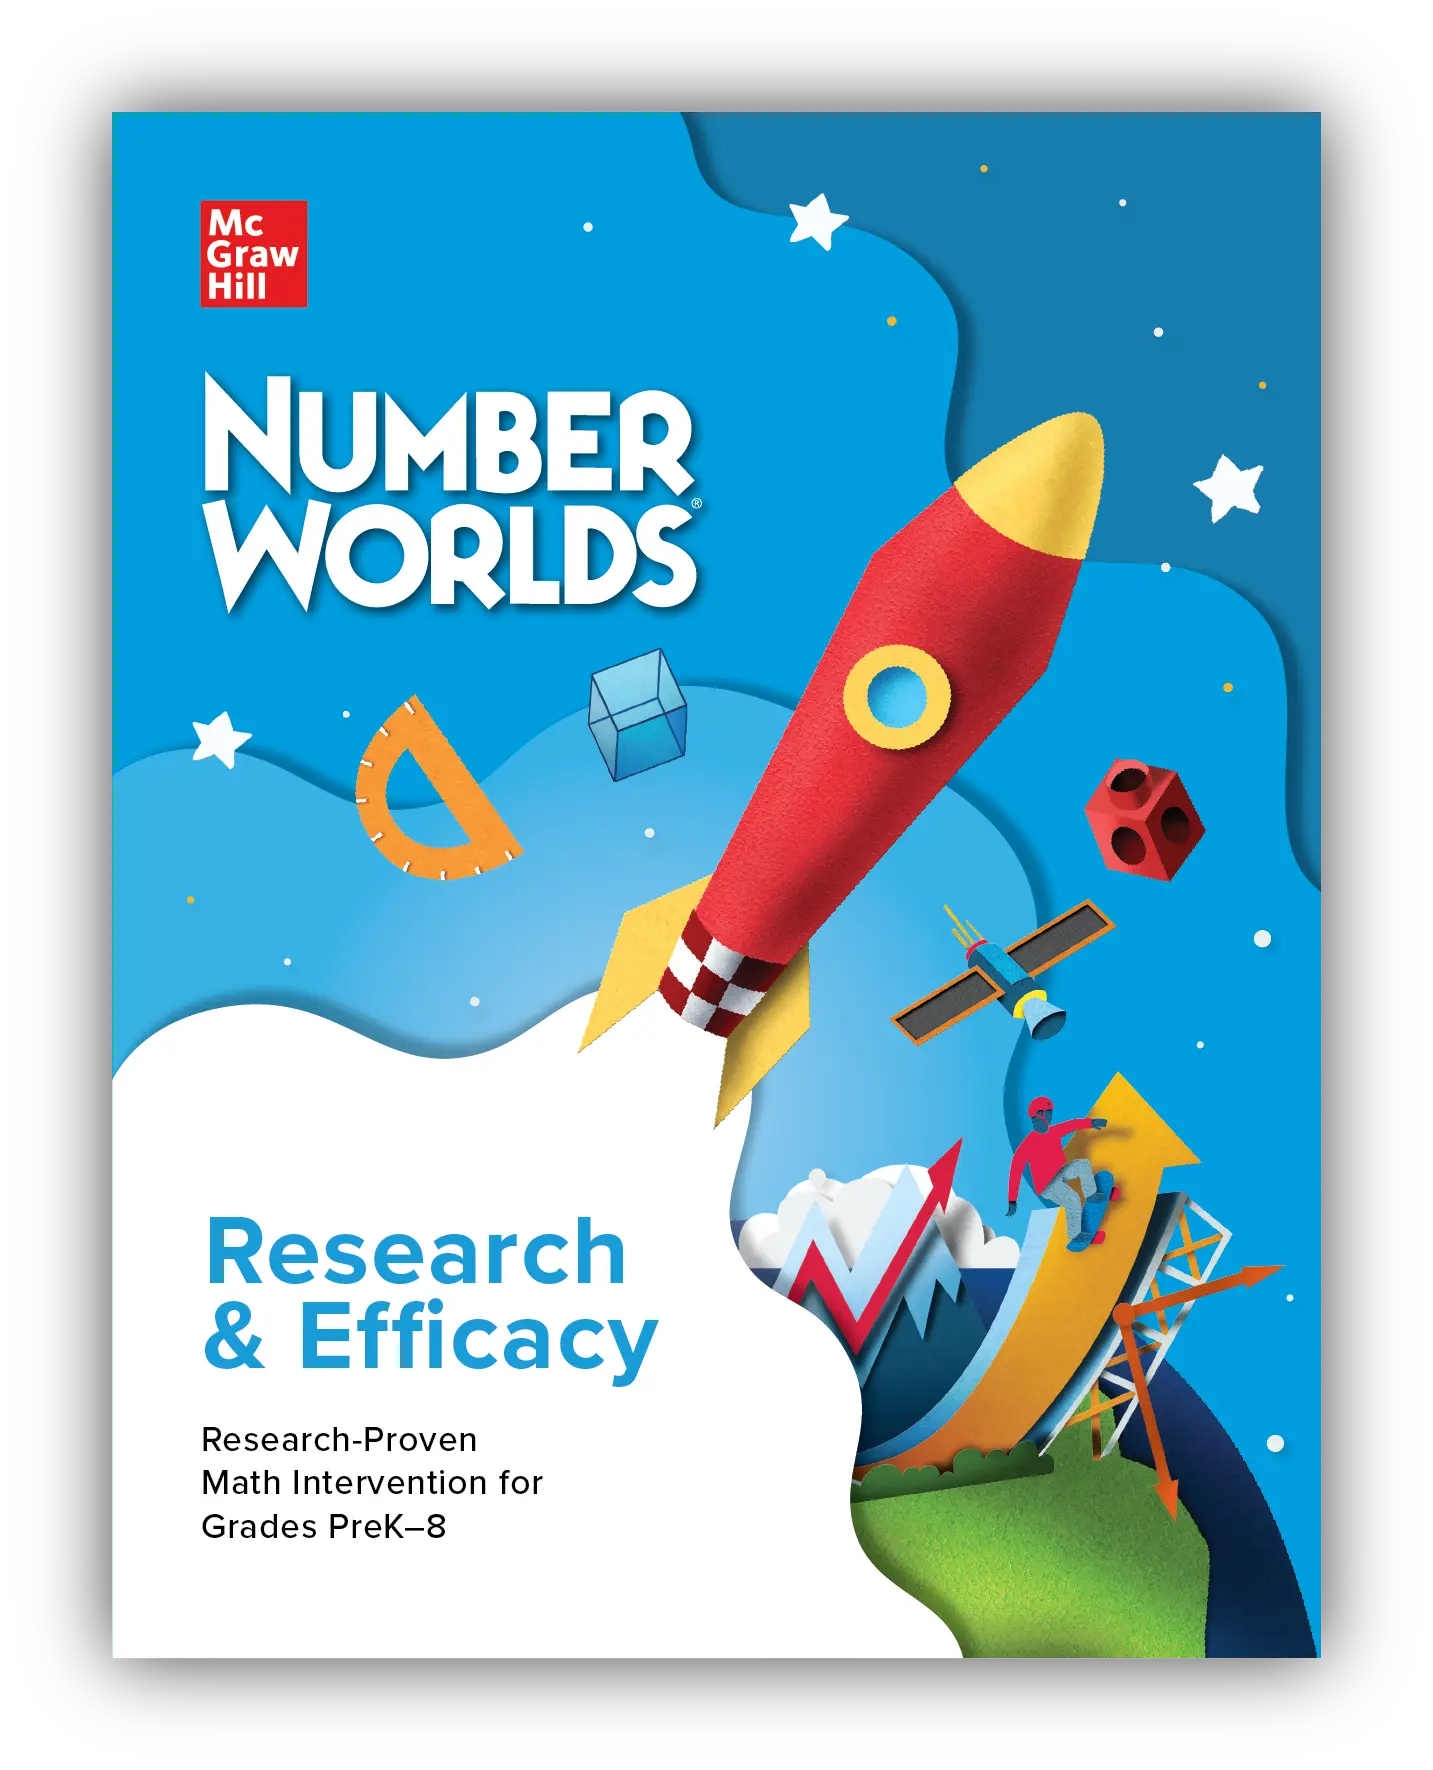 Number Worlds Research & Efficacy Brochure cover